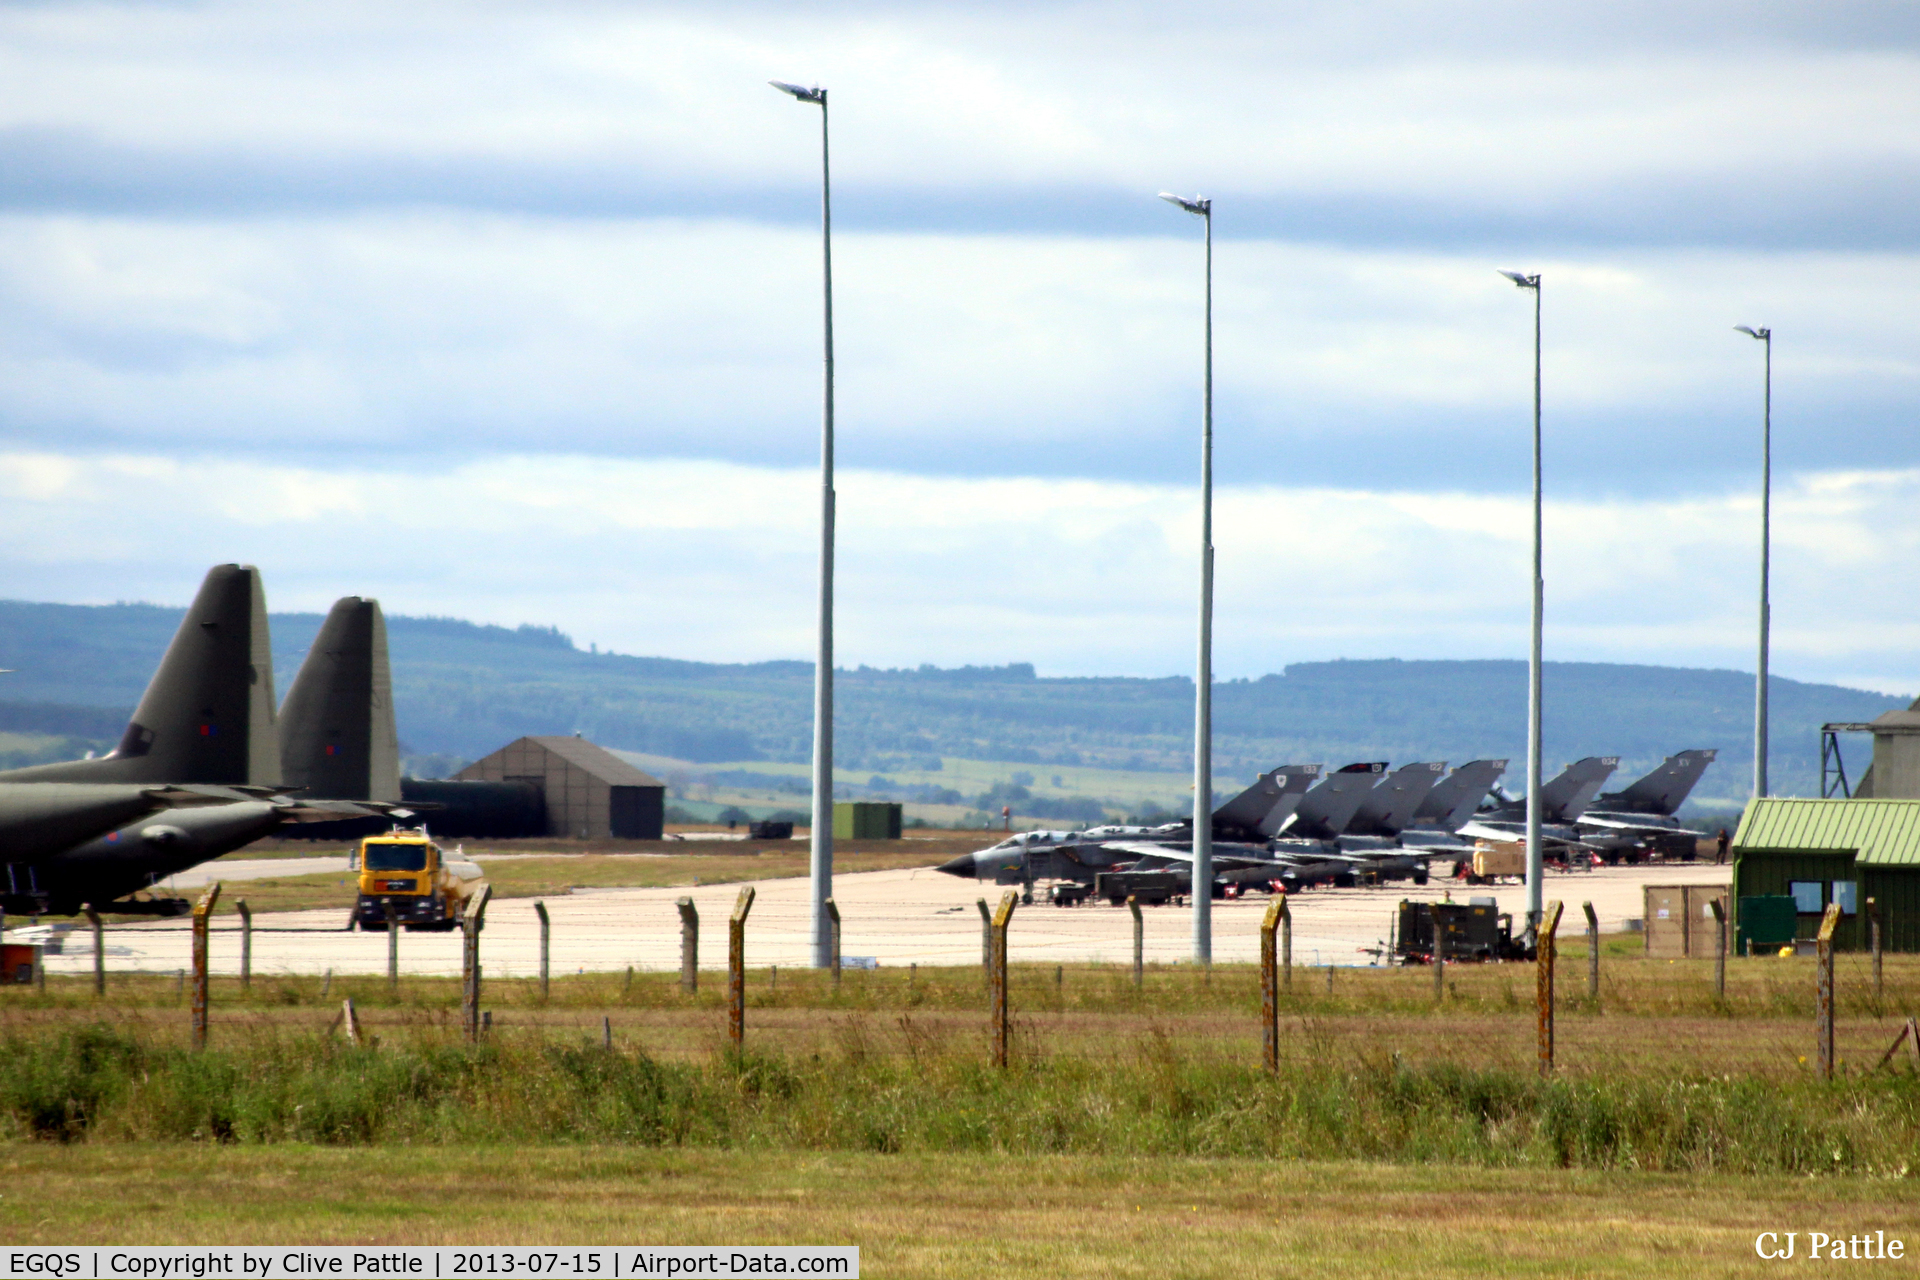 RAF Lossiemouth Airport, Lossiemouth, Scotland United Kingdom (EGQS) - A view of the northern apron at RAF Lossiemouth